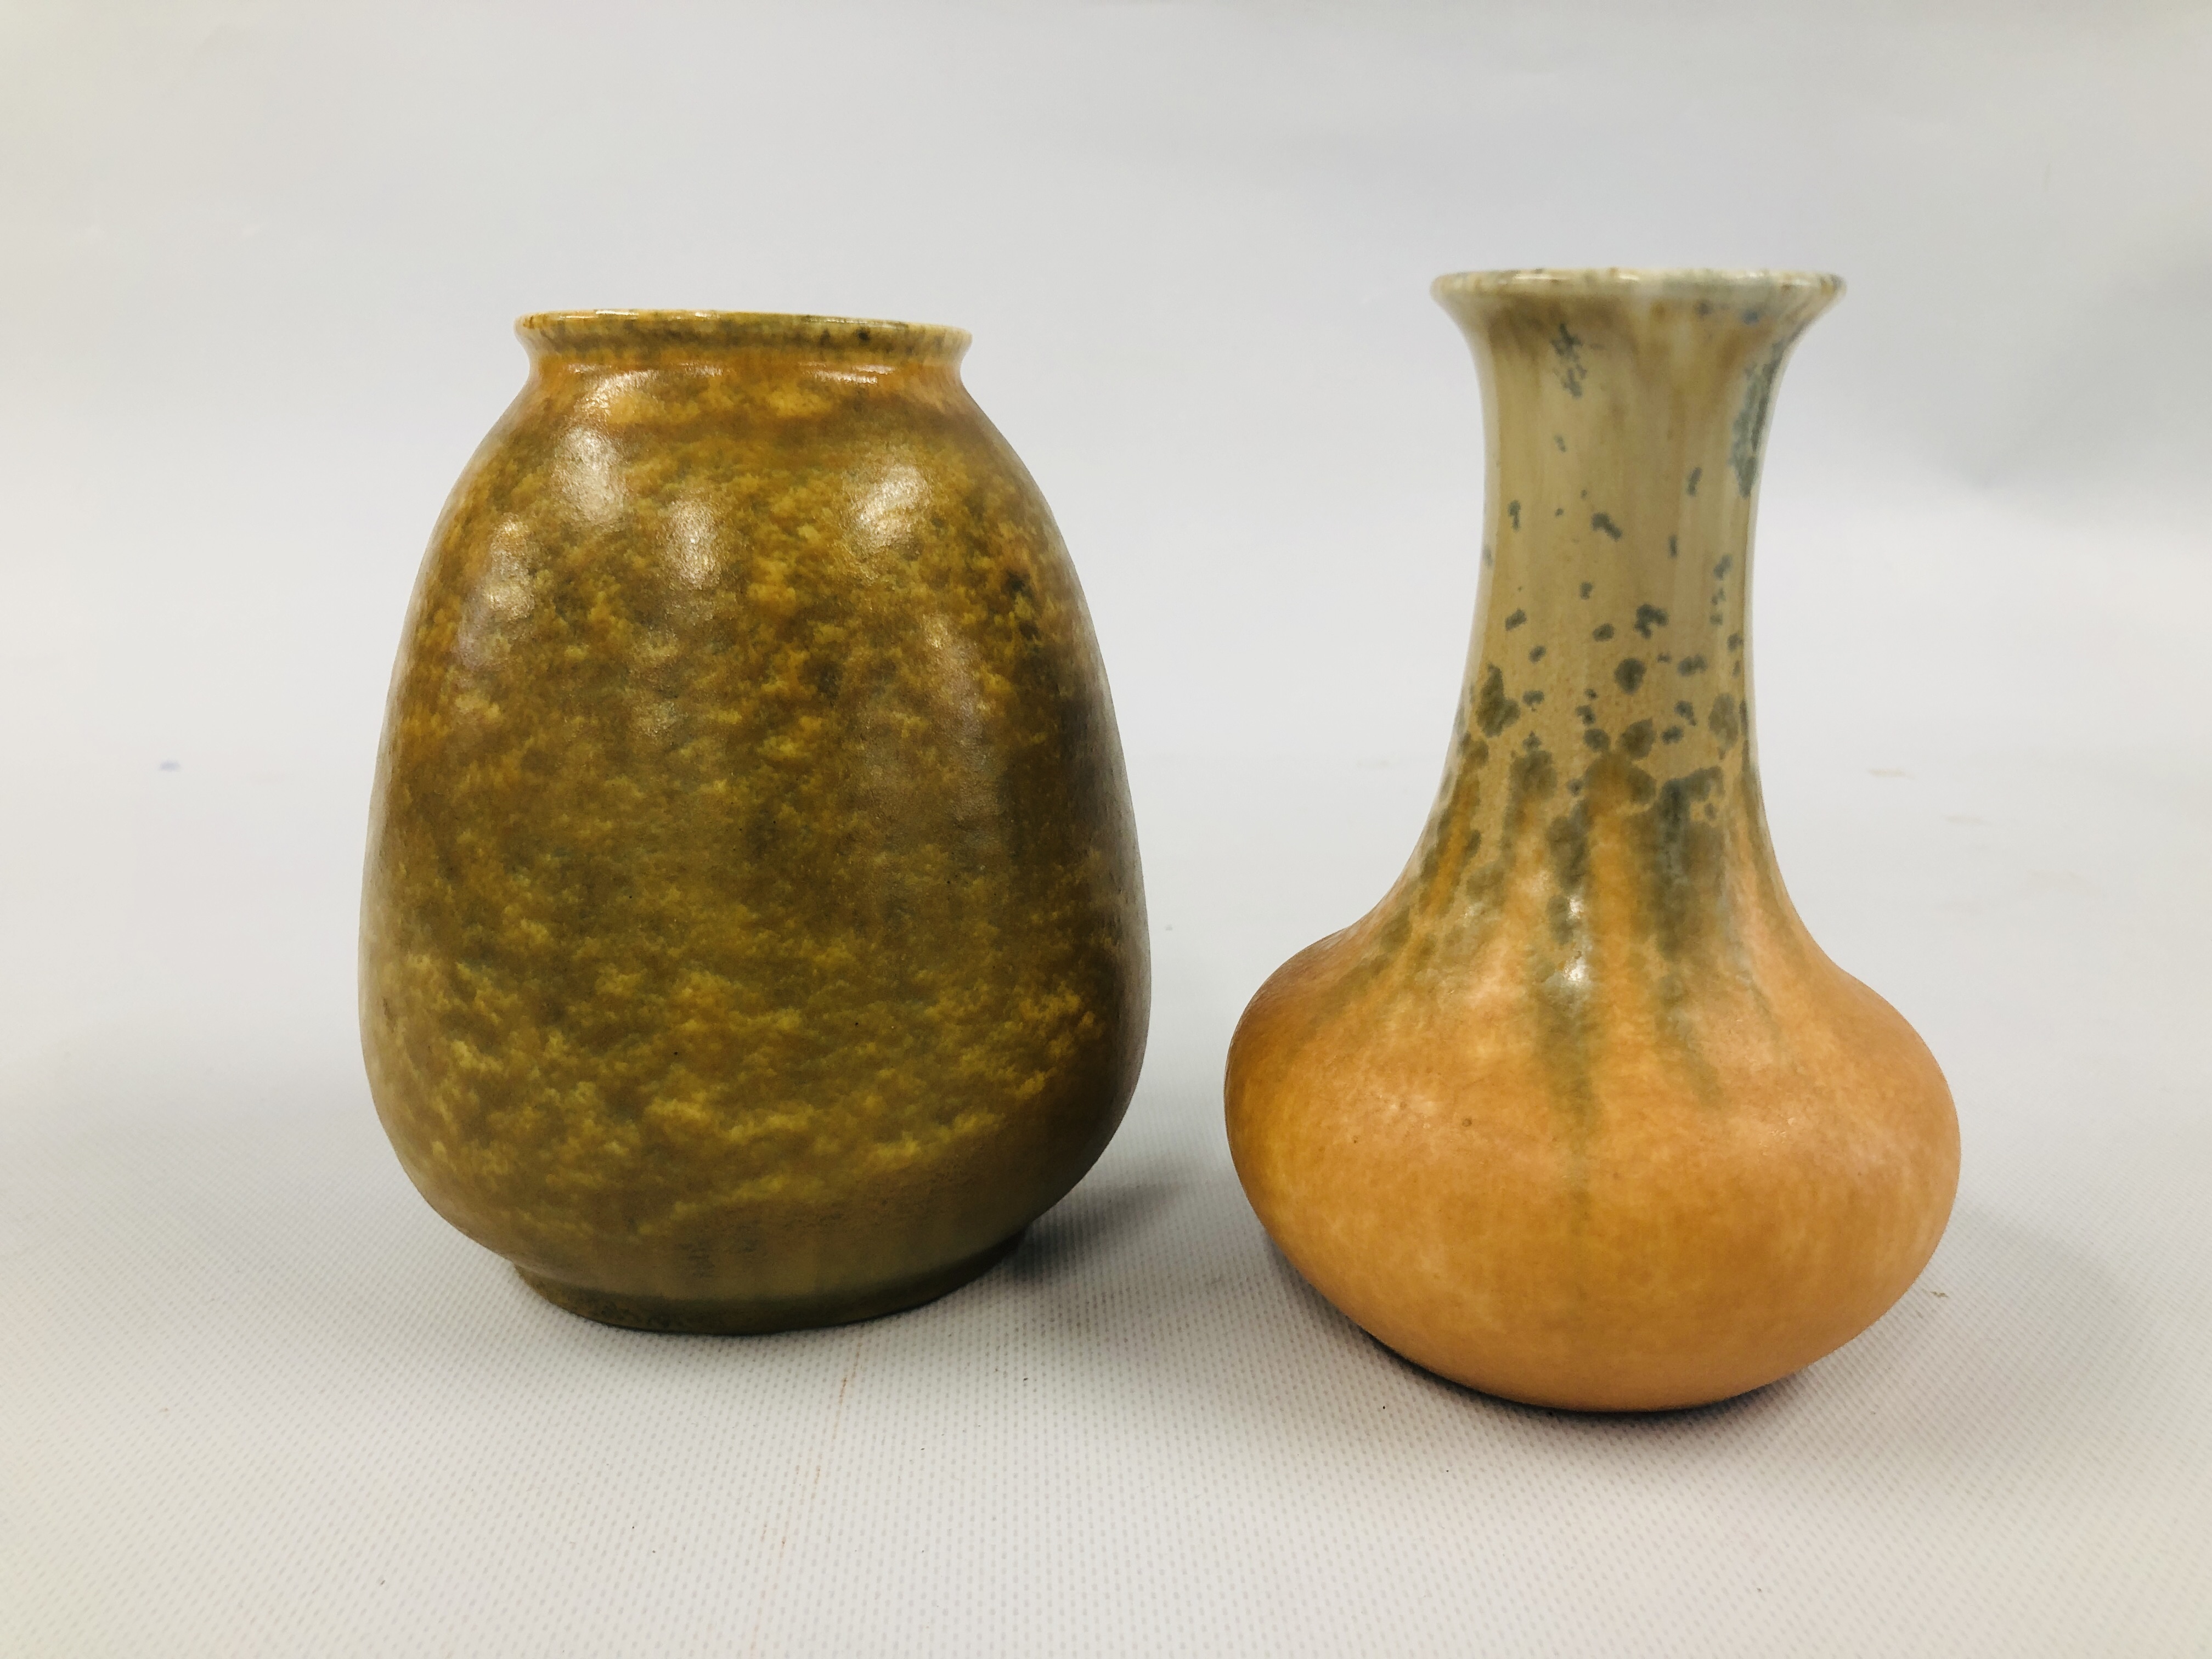 2 PIECES OF POTTERY MARK "RUSKIN" H 15.5CM.